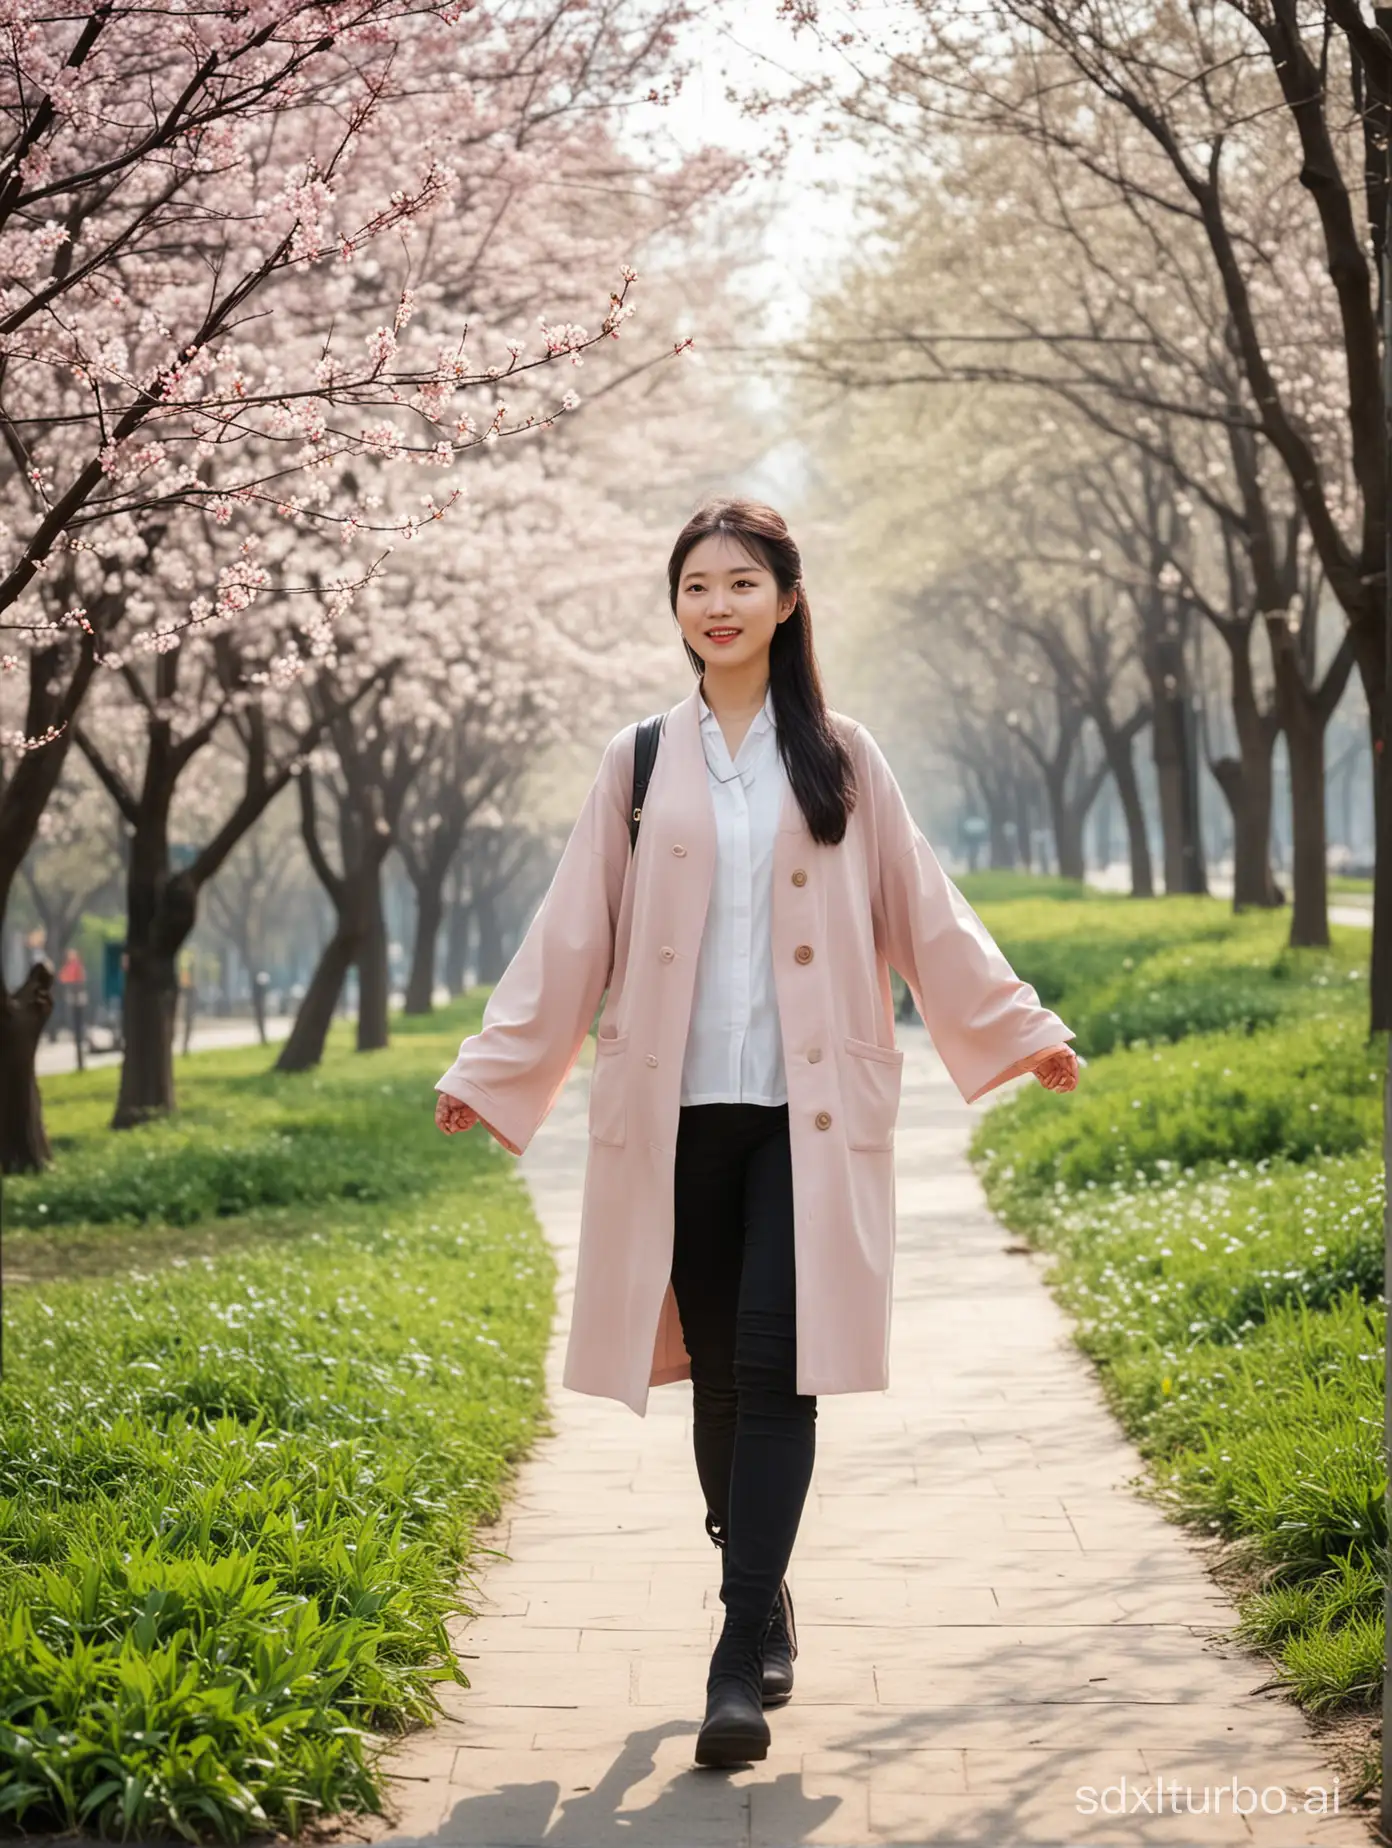 A 34-year-old girl named Jiangyang is walking in the park in spring.